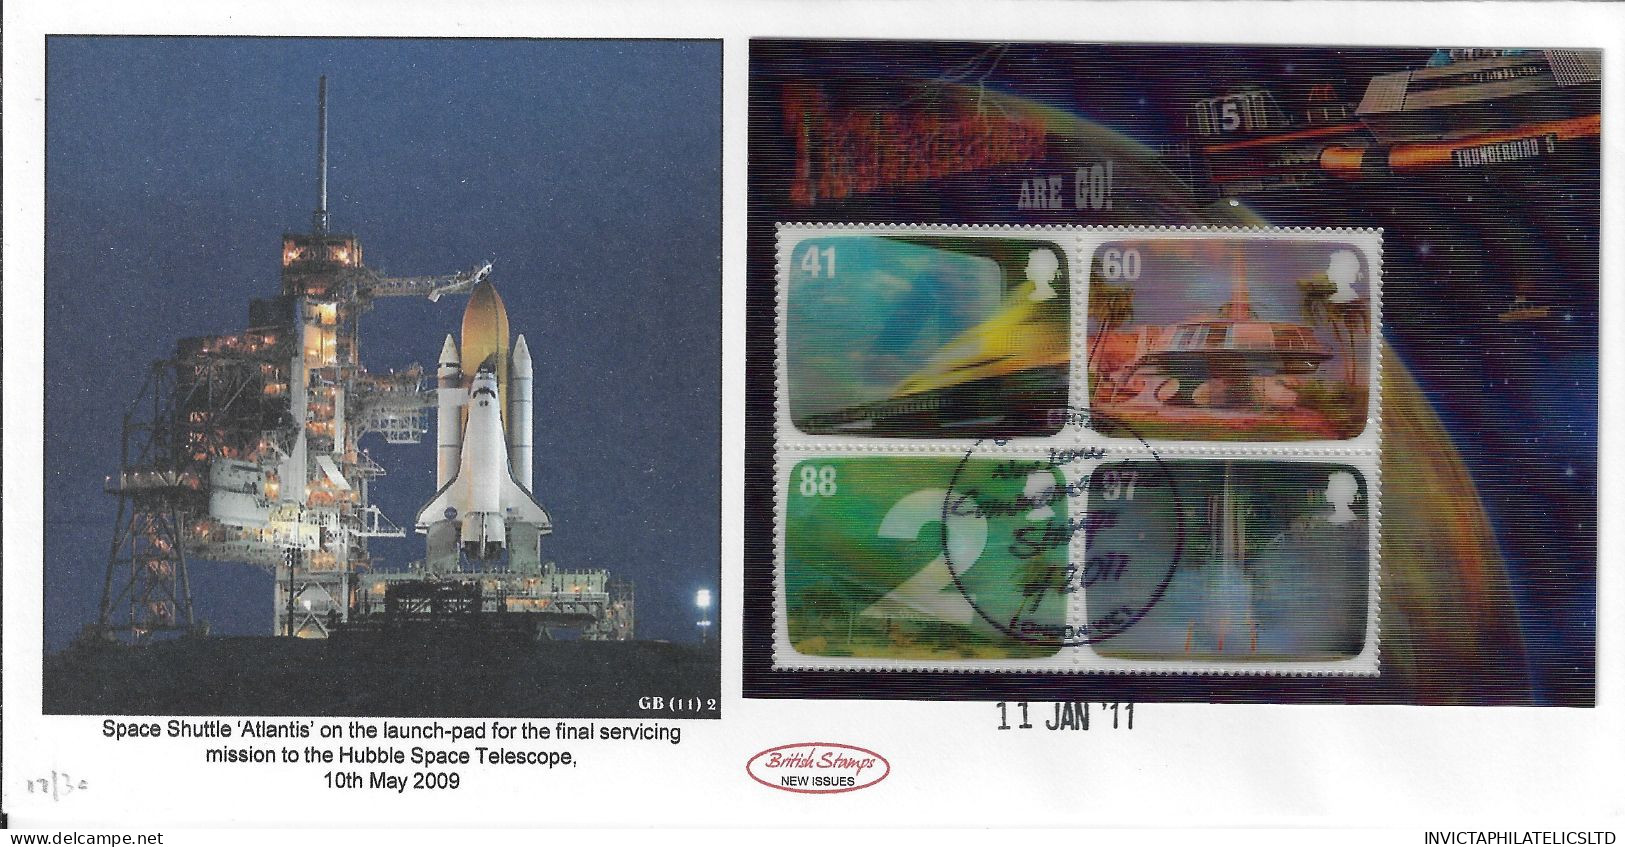 GB 2011 THUNDERBIRDS MINI SHEET, CAMBRIDGE STAMP CENTRE OFFICIAL FDC, 30 PRODUCED ONLY - 2011-2020 Decimale Uitgaven